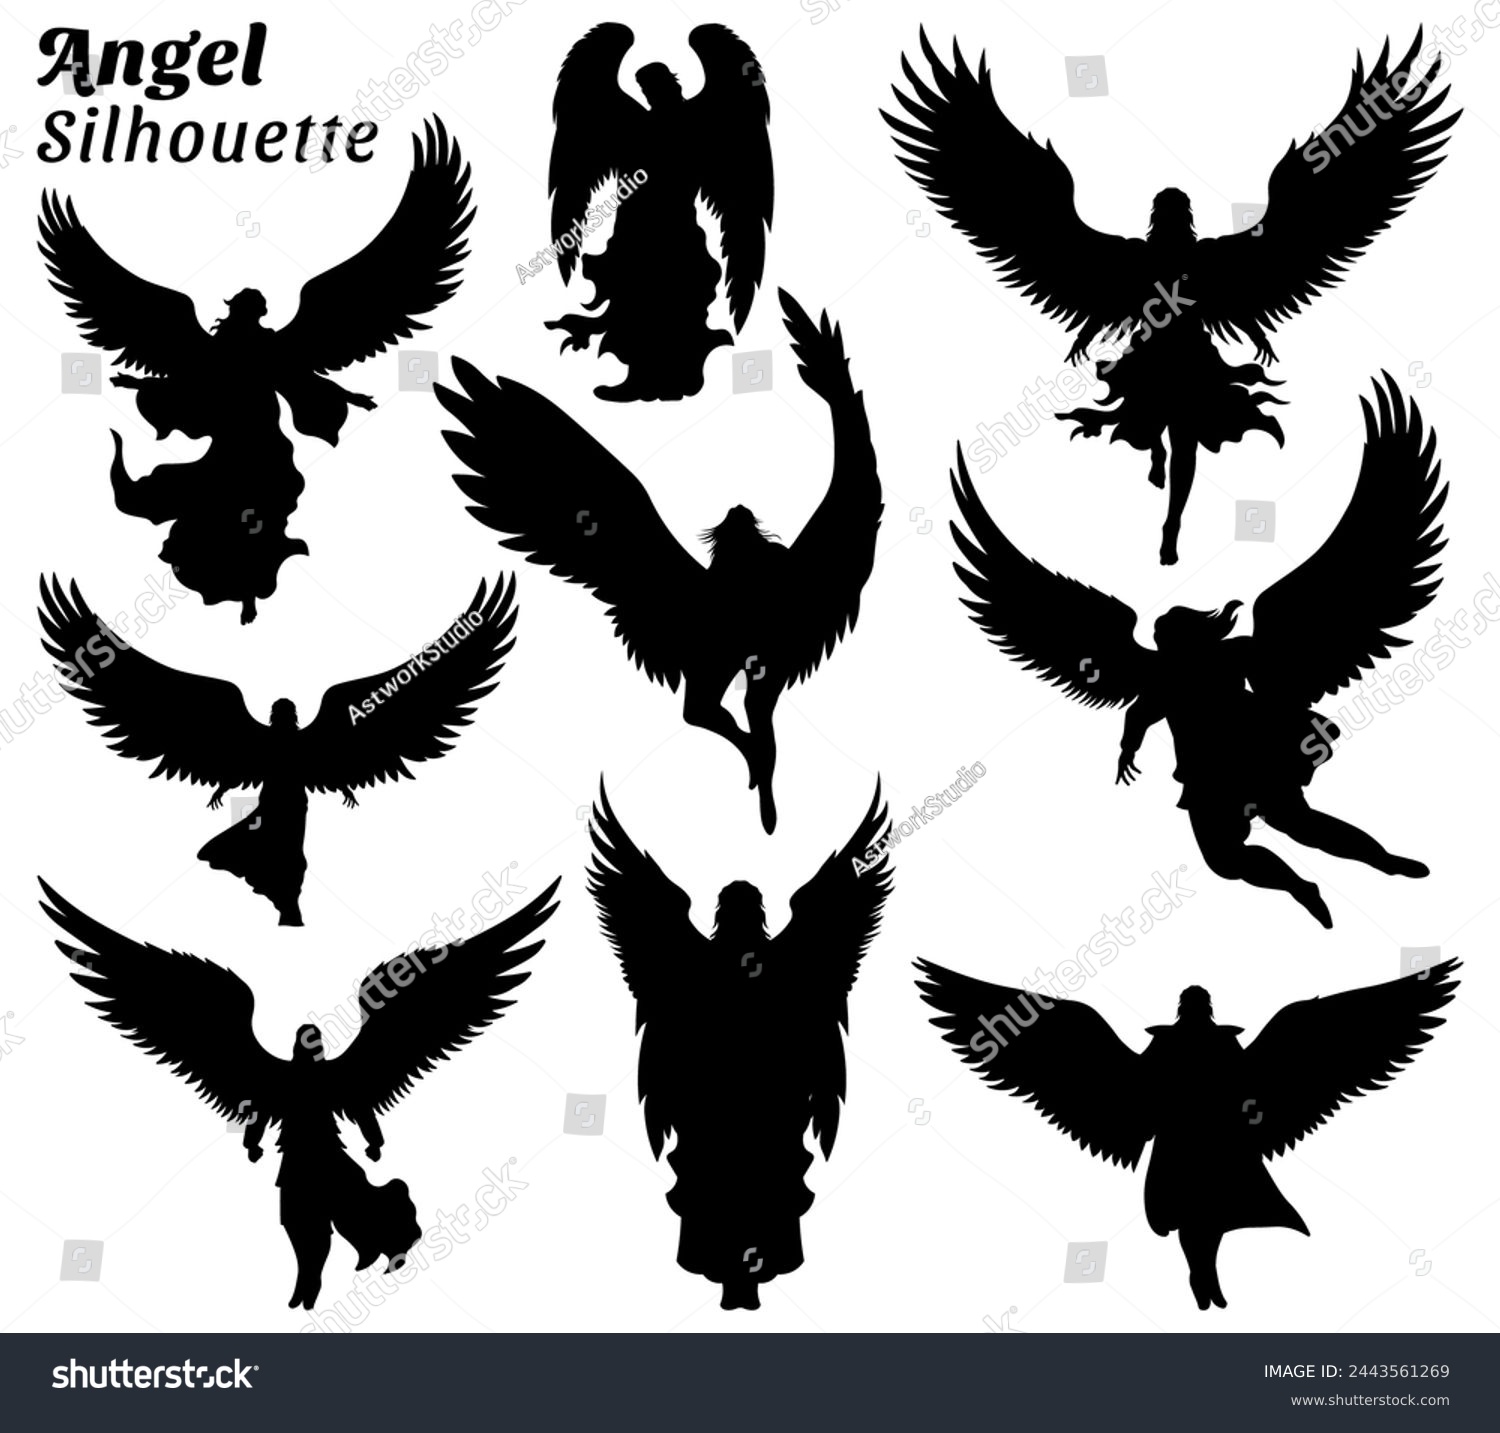 SVG of Collection of angel silhouette illustrations svg